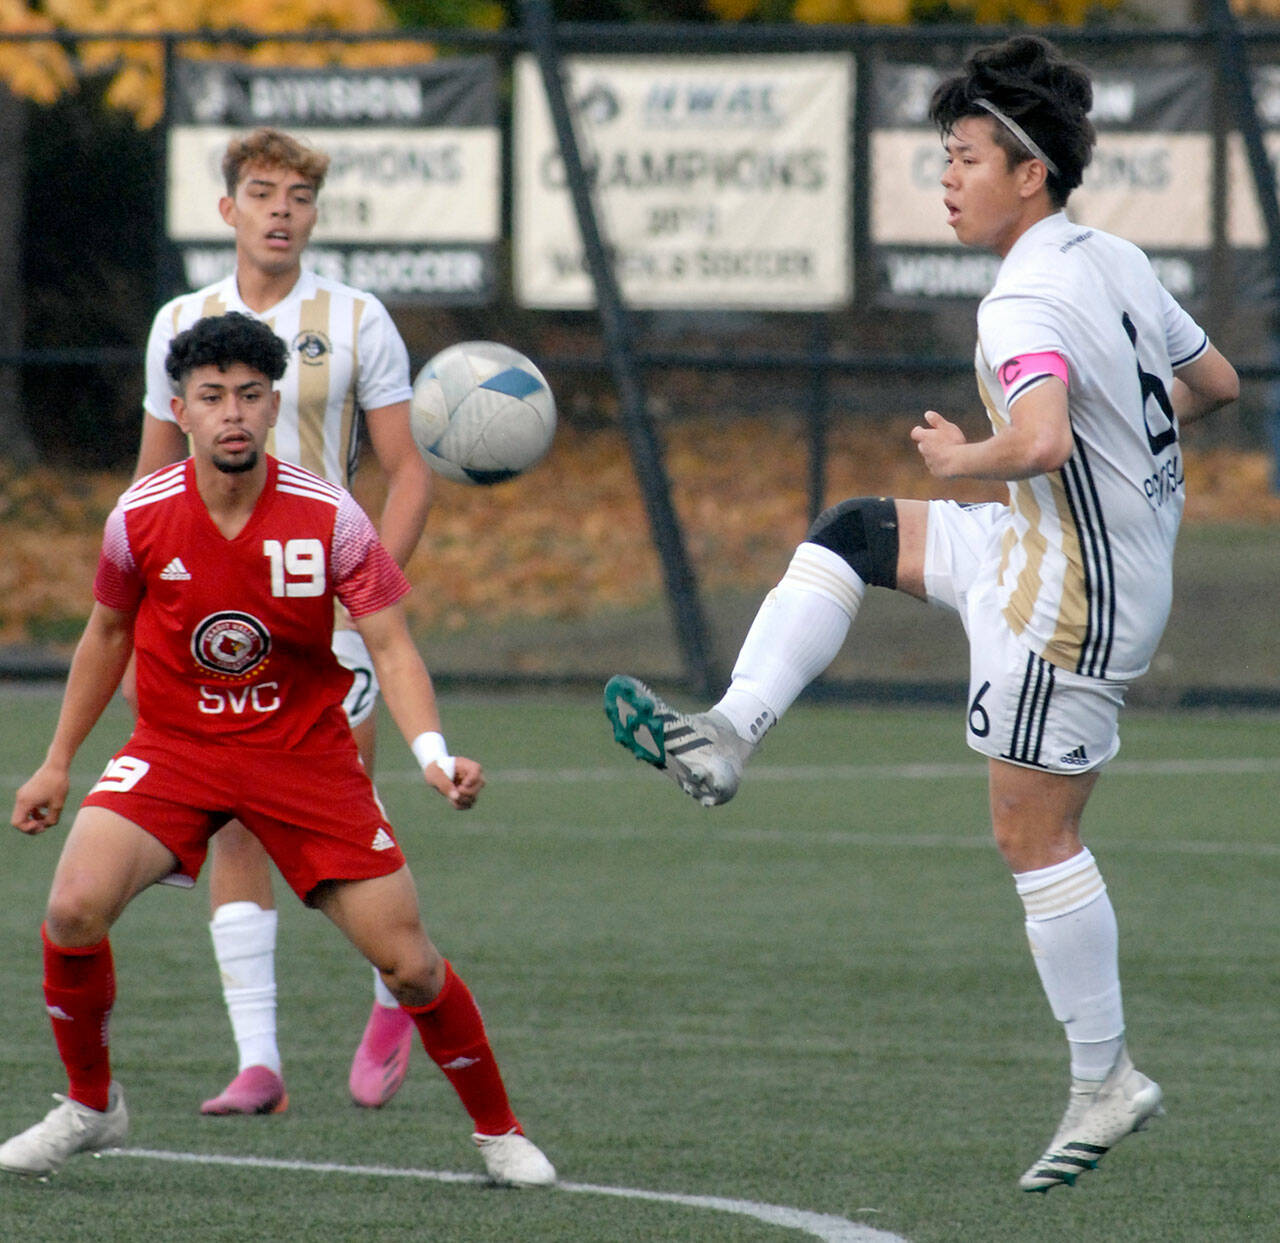 Peninsula’s Jeong Hyun Kang, right, gets in a high kick as Skagit Valley’s Sergio Garduno Mendez, left, and teammate Christopher Dominguez look on during Wednesday’s match in Port Angeles. (Keith Thorpe/Peninsula Daily News)